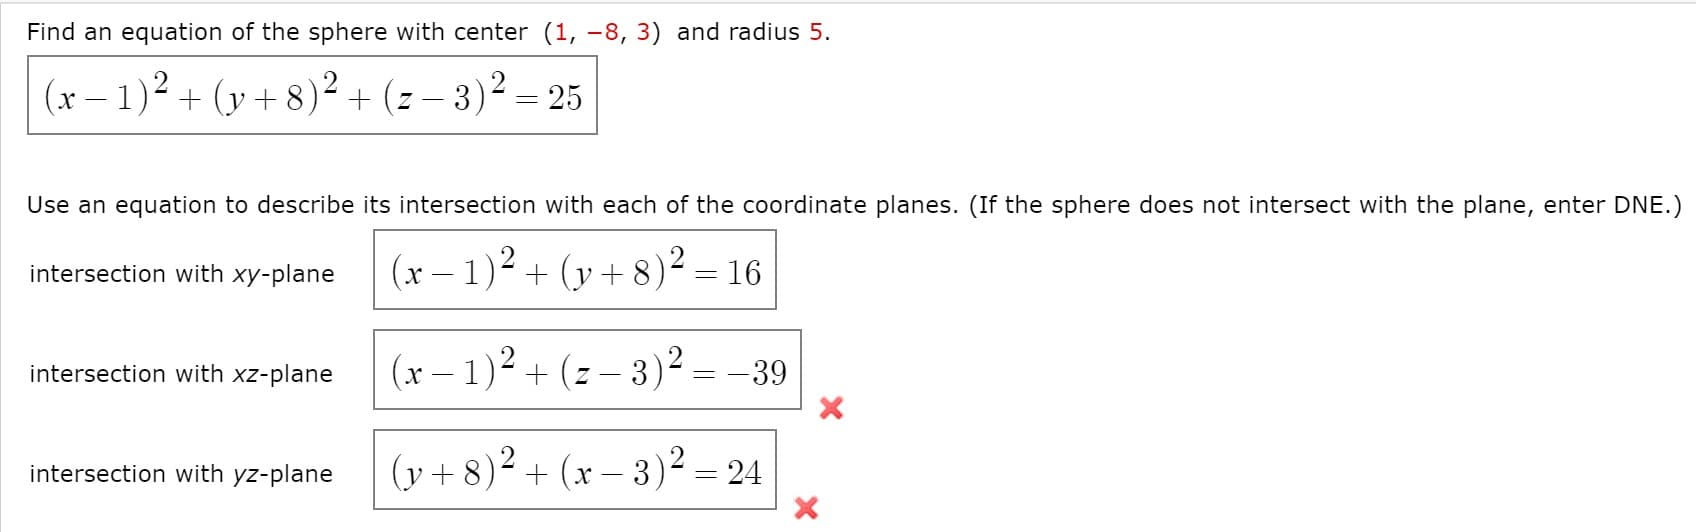 Find an equation of the sphere with center (1, -8, 3) and radius 5.
(x –
r- 1)² + (y + 8)² + (z – 3)² = 25
Use an equation to describe its intersection with each of the coordinate planes. (If the sphere does not intersect with the plane, enter DNE.)
intersection with xy-plane
(x – 1)² + (y + 8)² = 16
intersection with xz-plane
(x – 1)² + (z – 3)² = -39
(y + 8)² + (x – 3)²:
intersection with yz-plane
